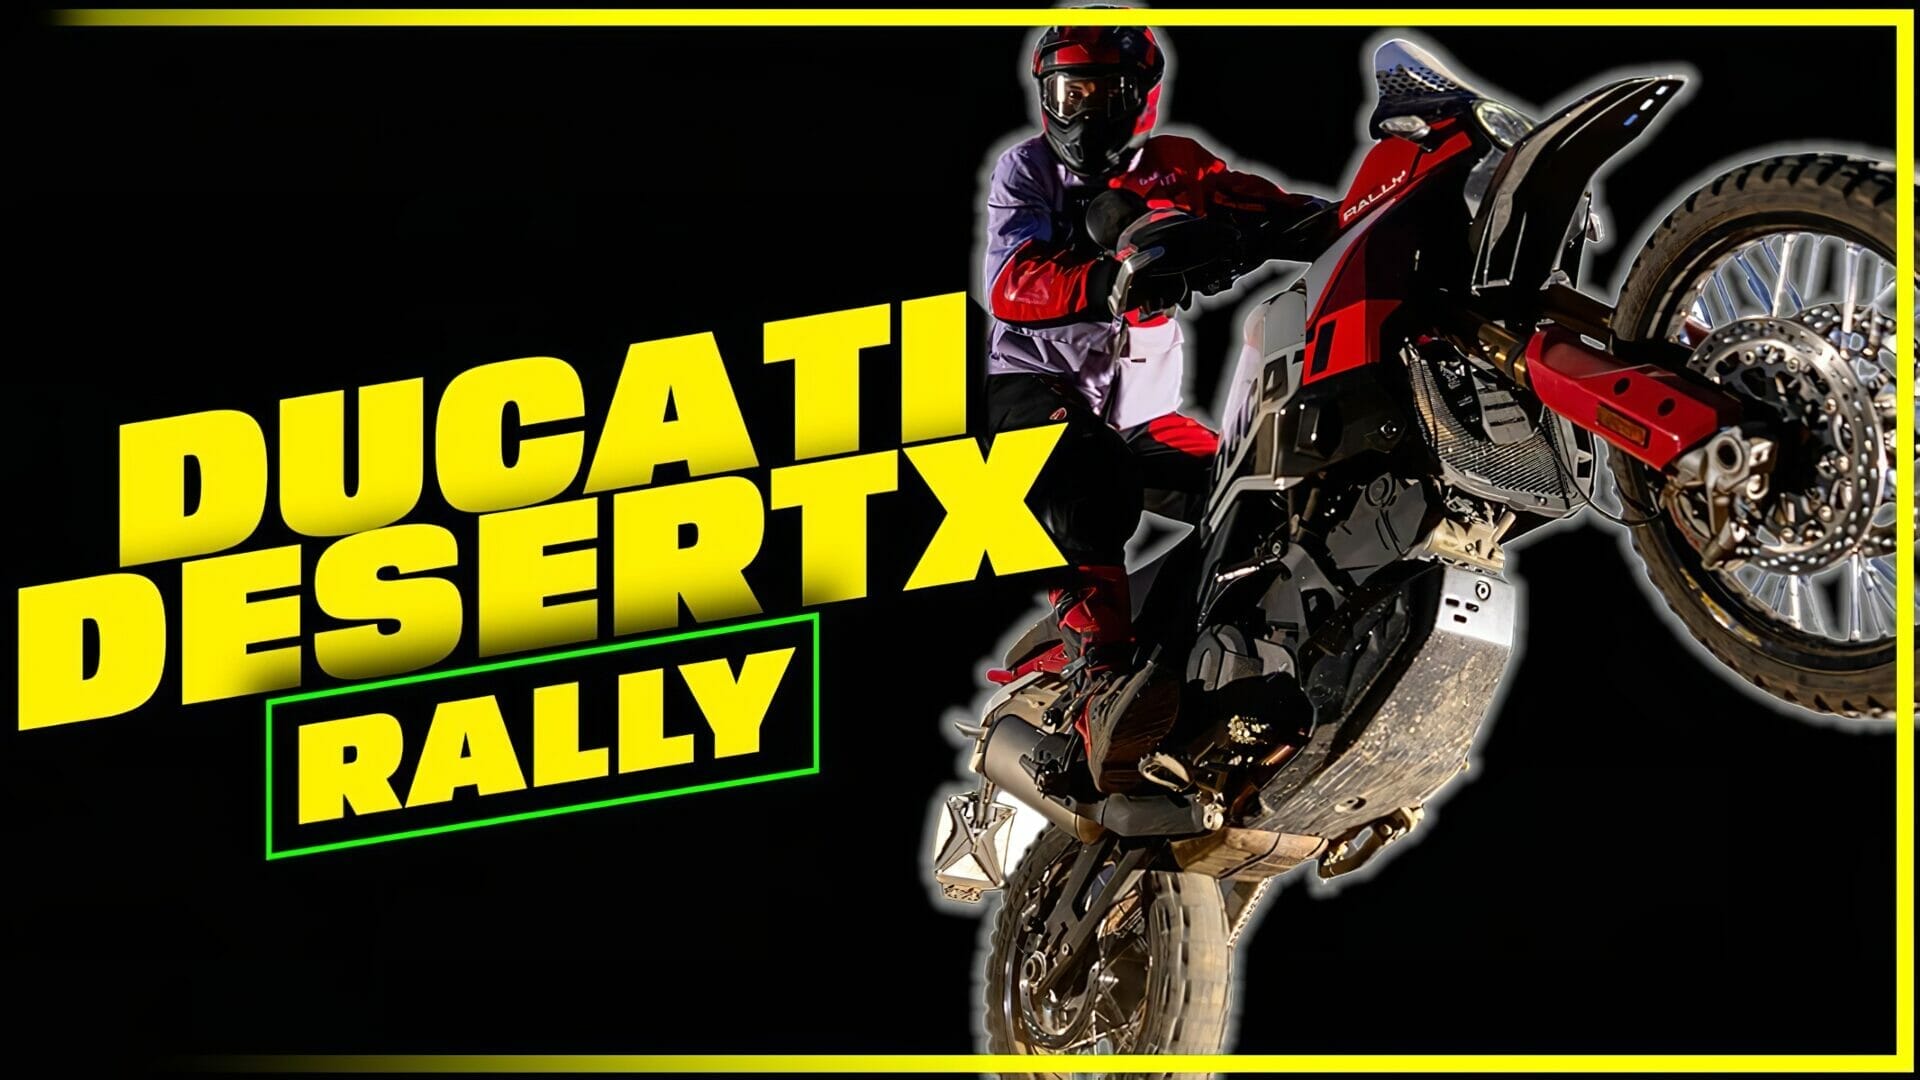 Ducati’s new DesertX Rally – Off-road in style